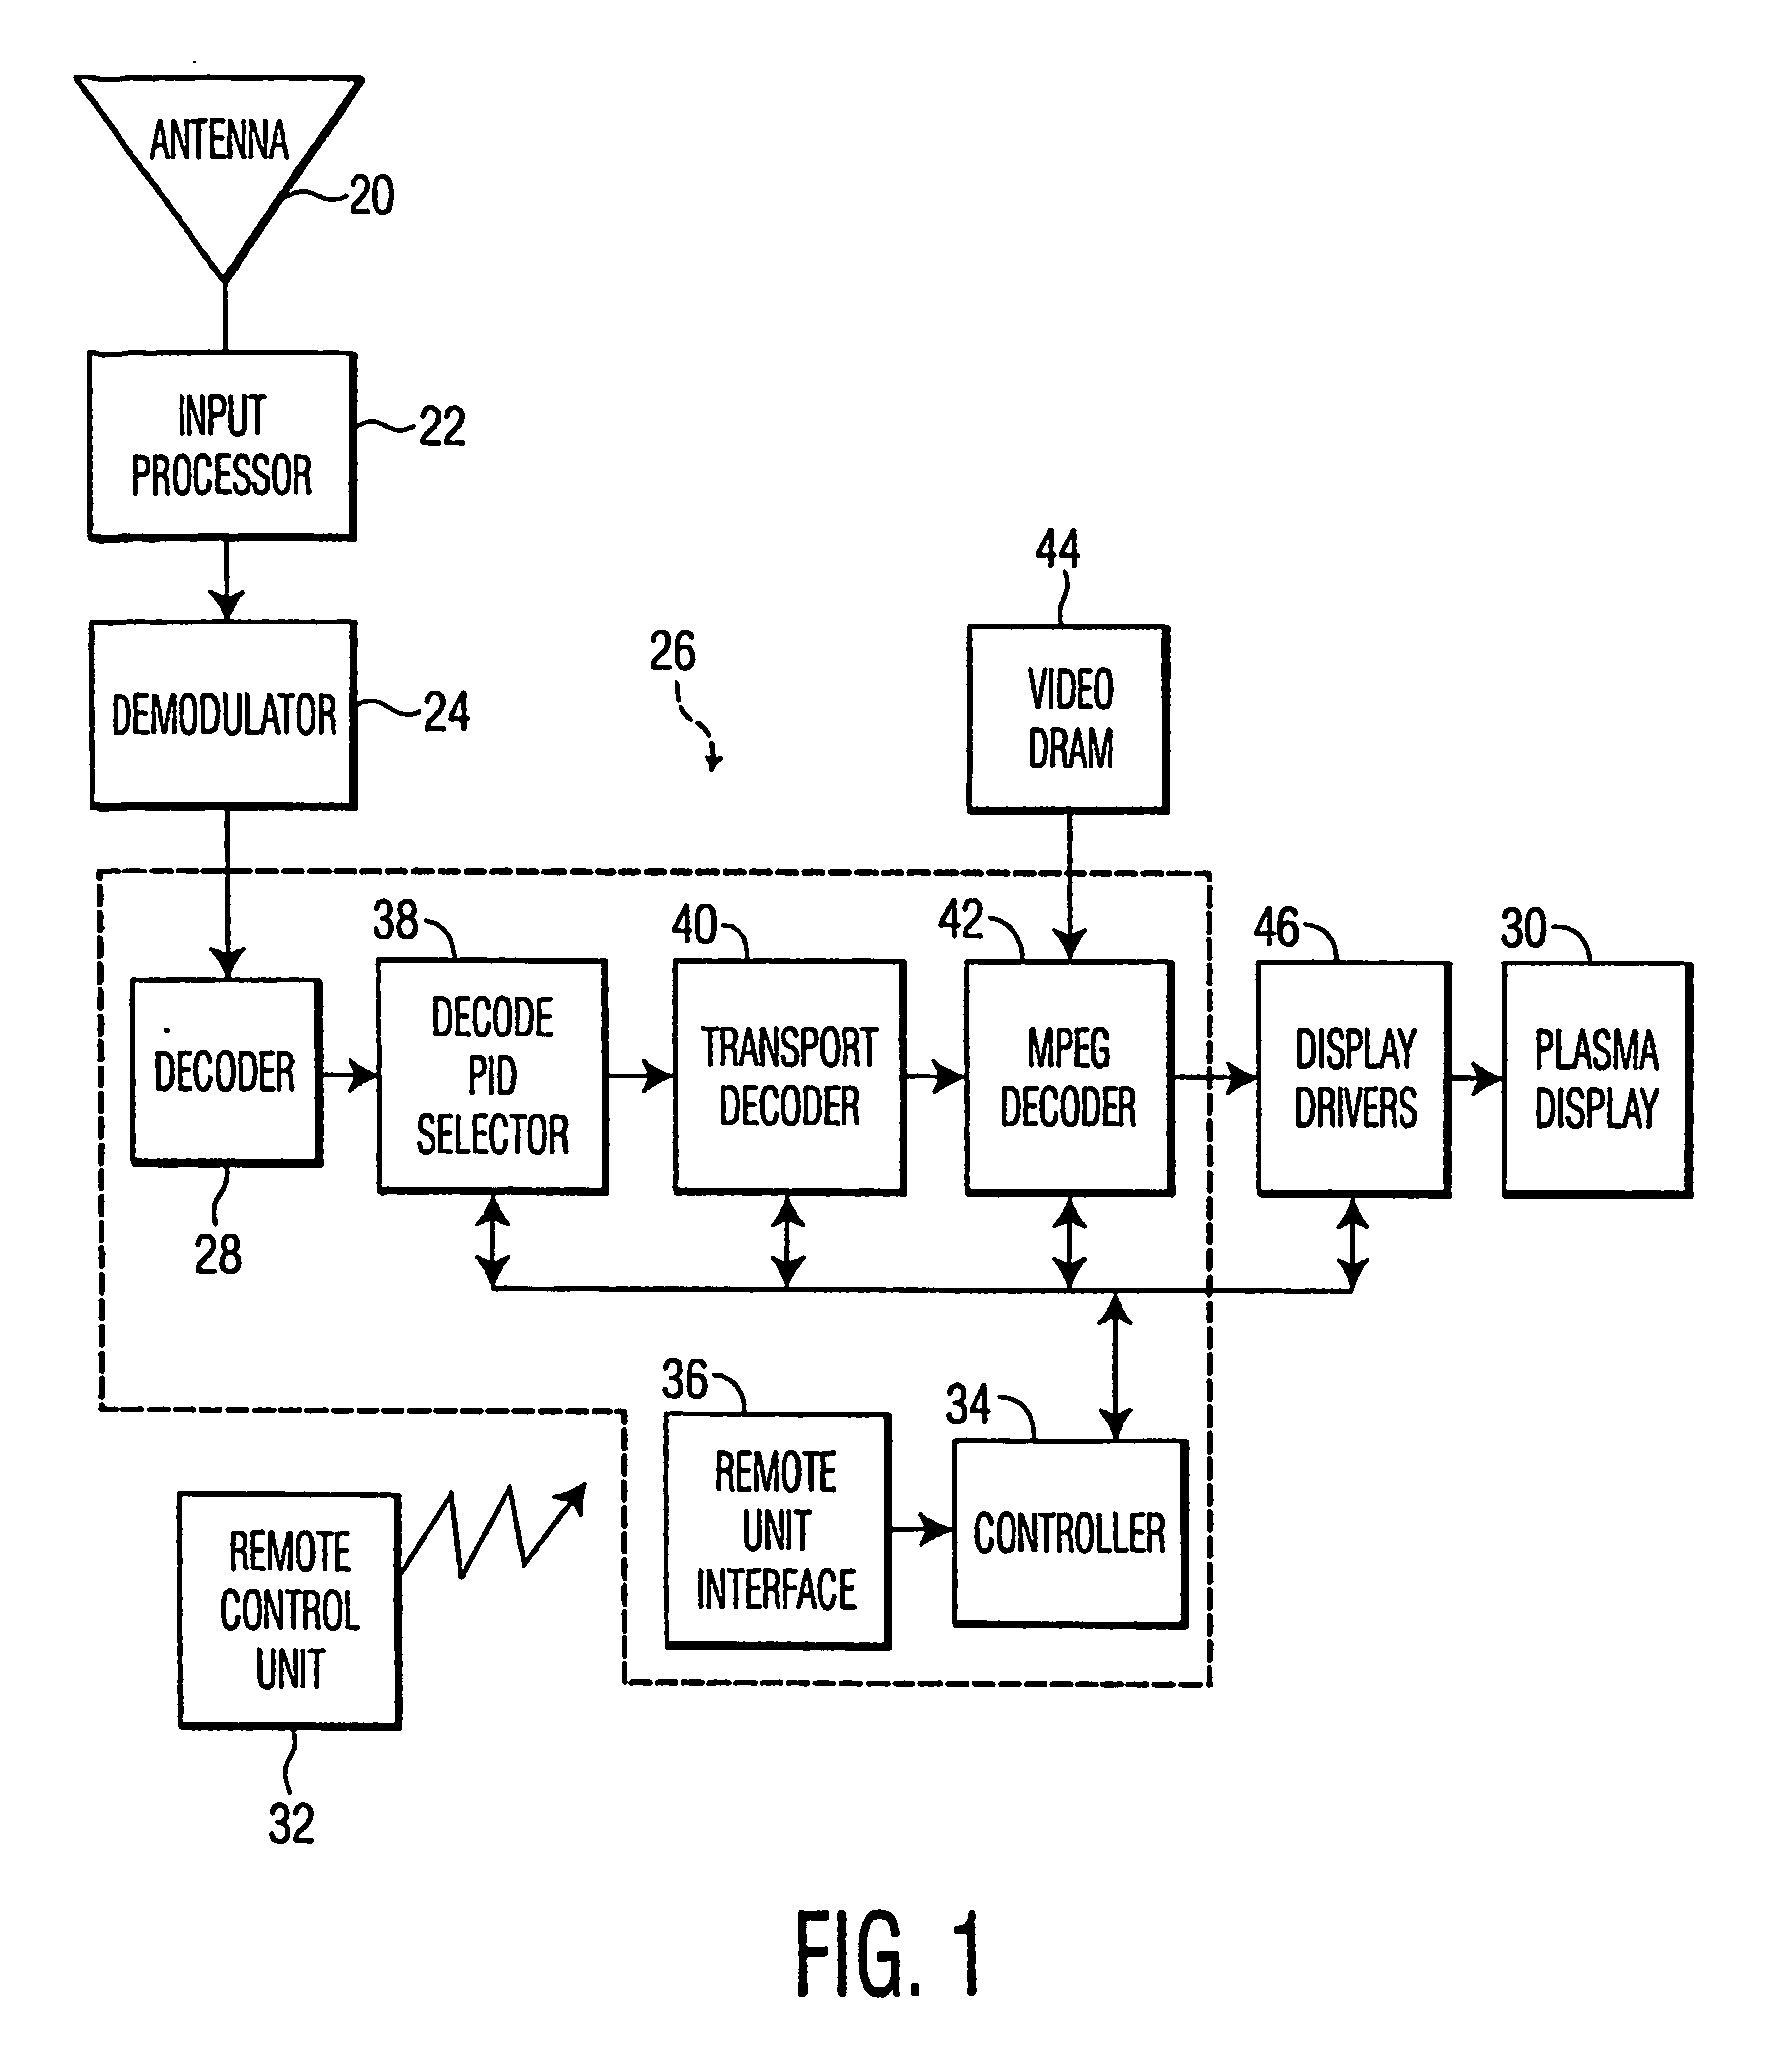 Method and system for detecting and performing automatic bank switching for a filter coefficient ram